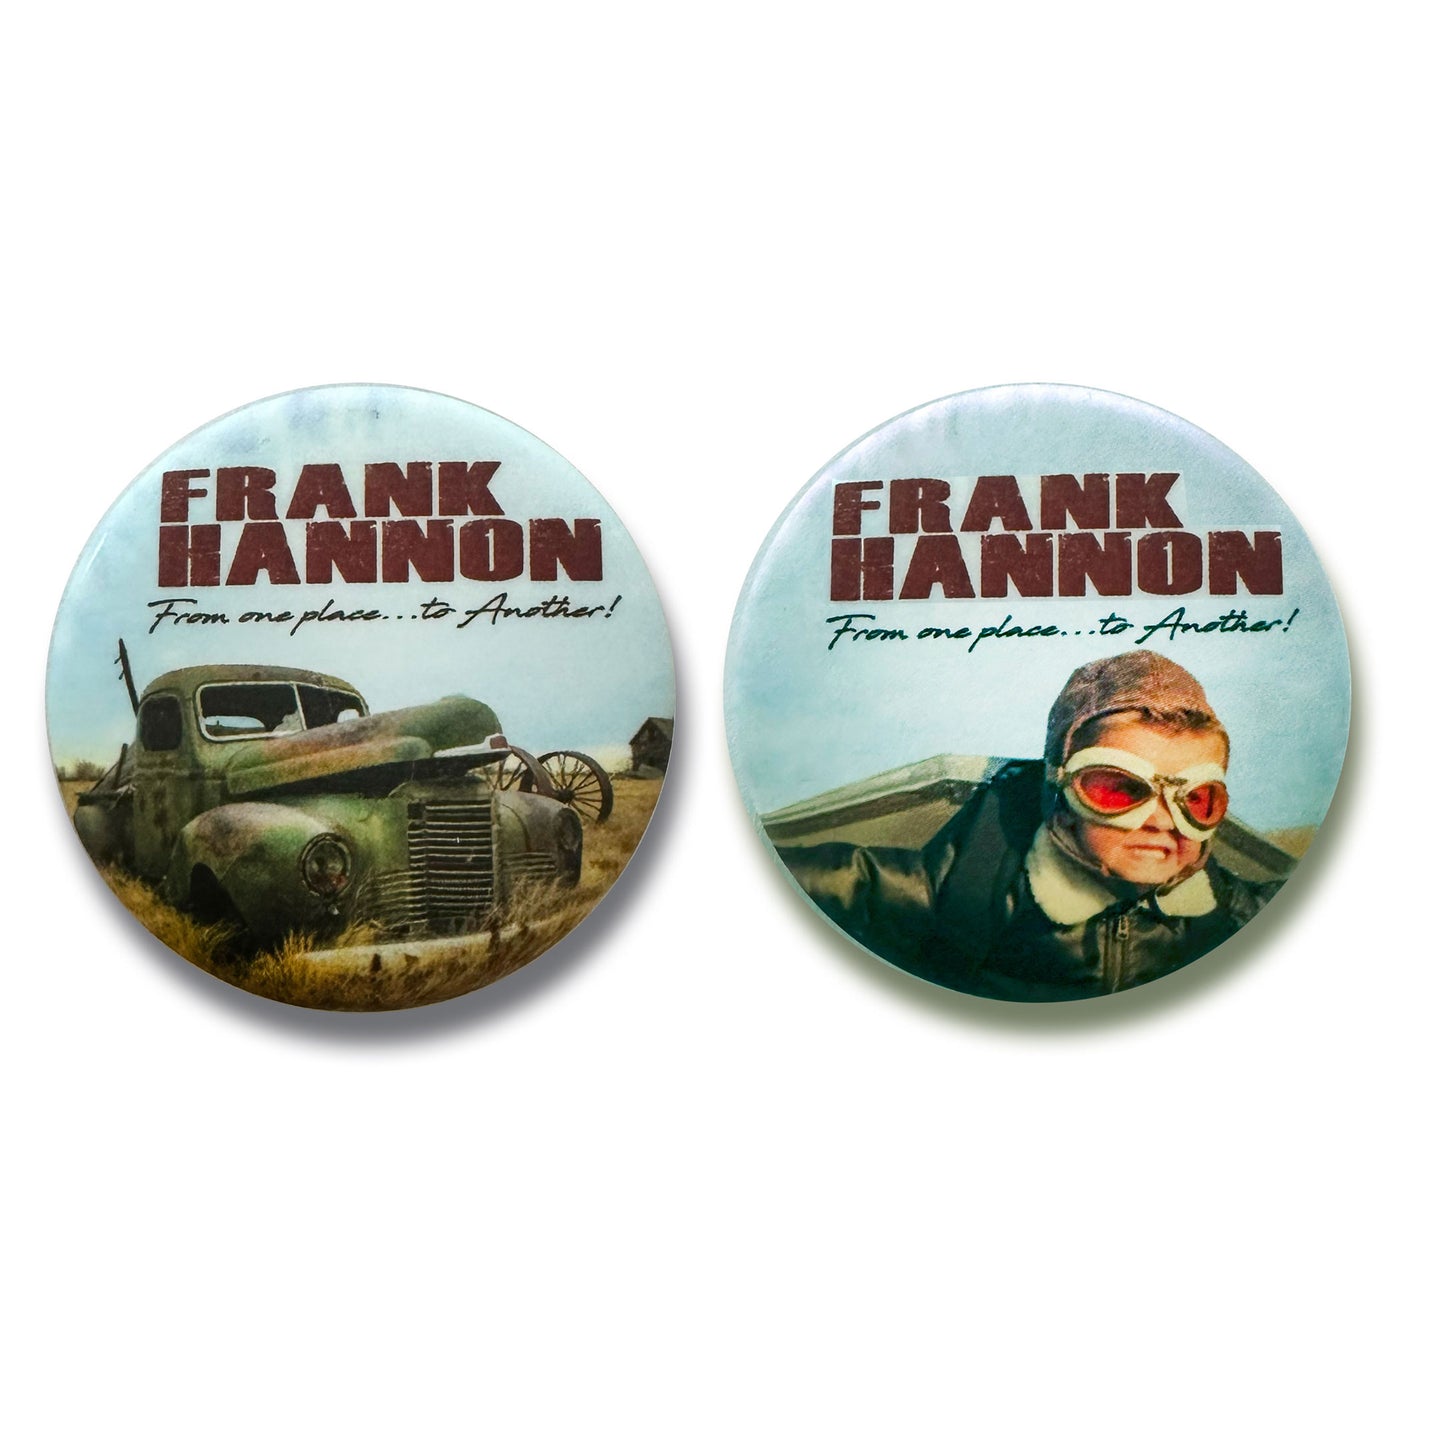 "From one place...to another!, Vol. I & 2" 1.5" Pinback Button Set